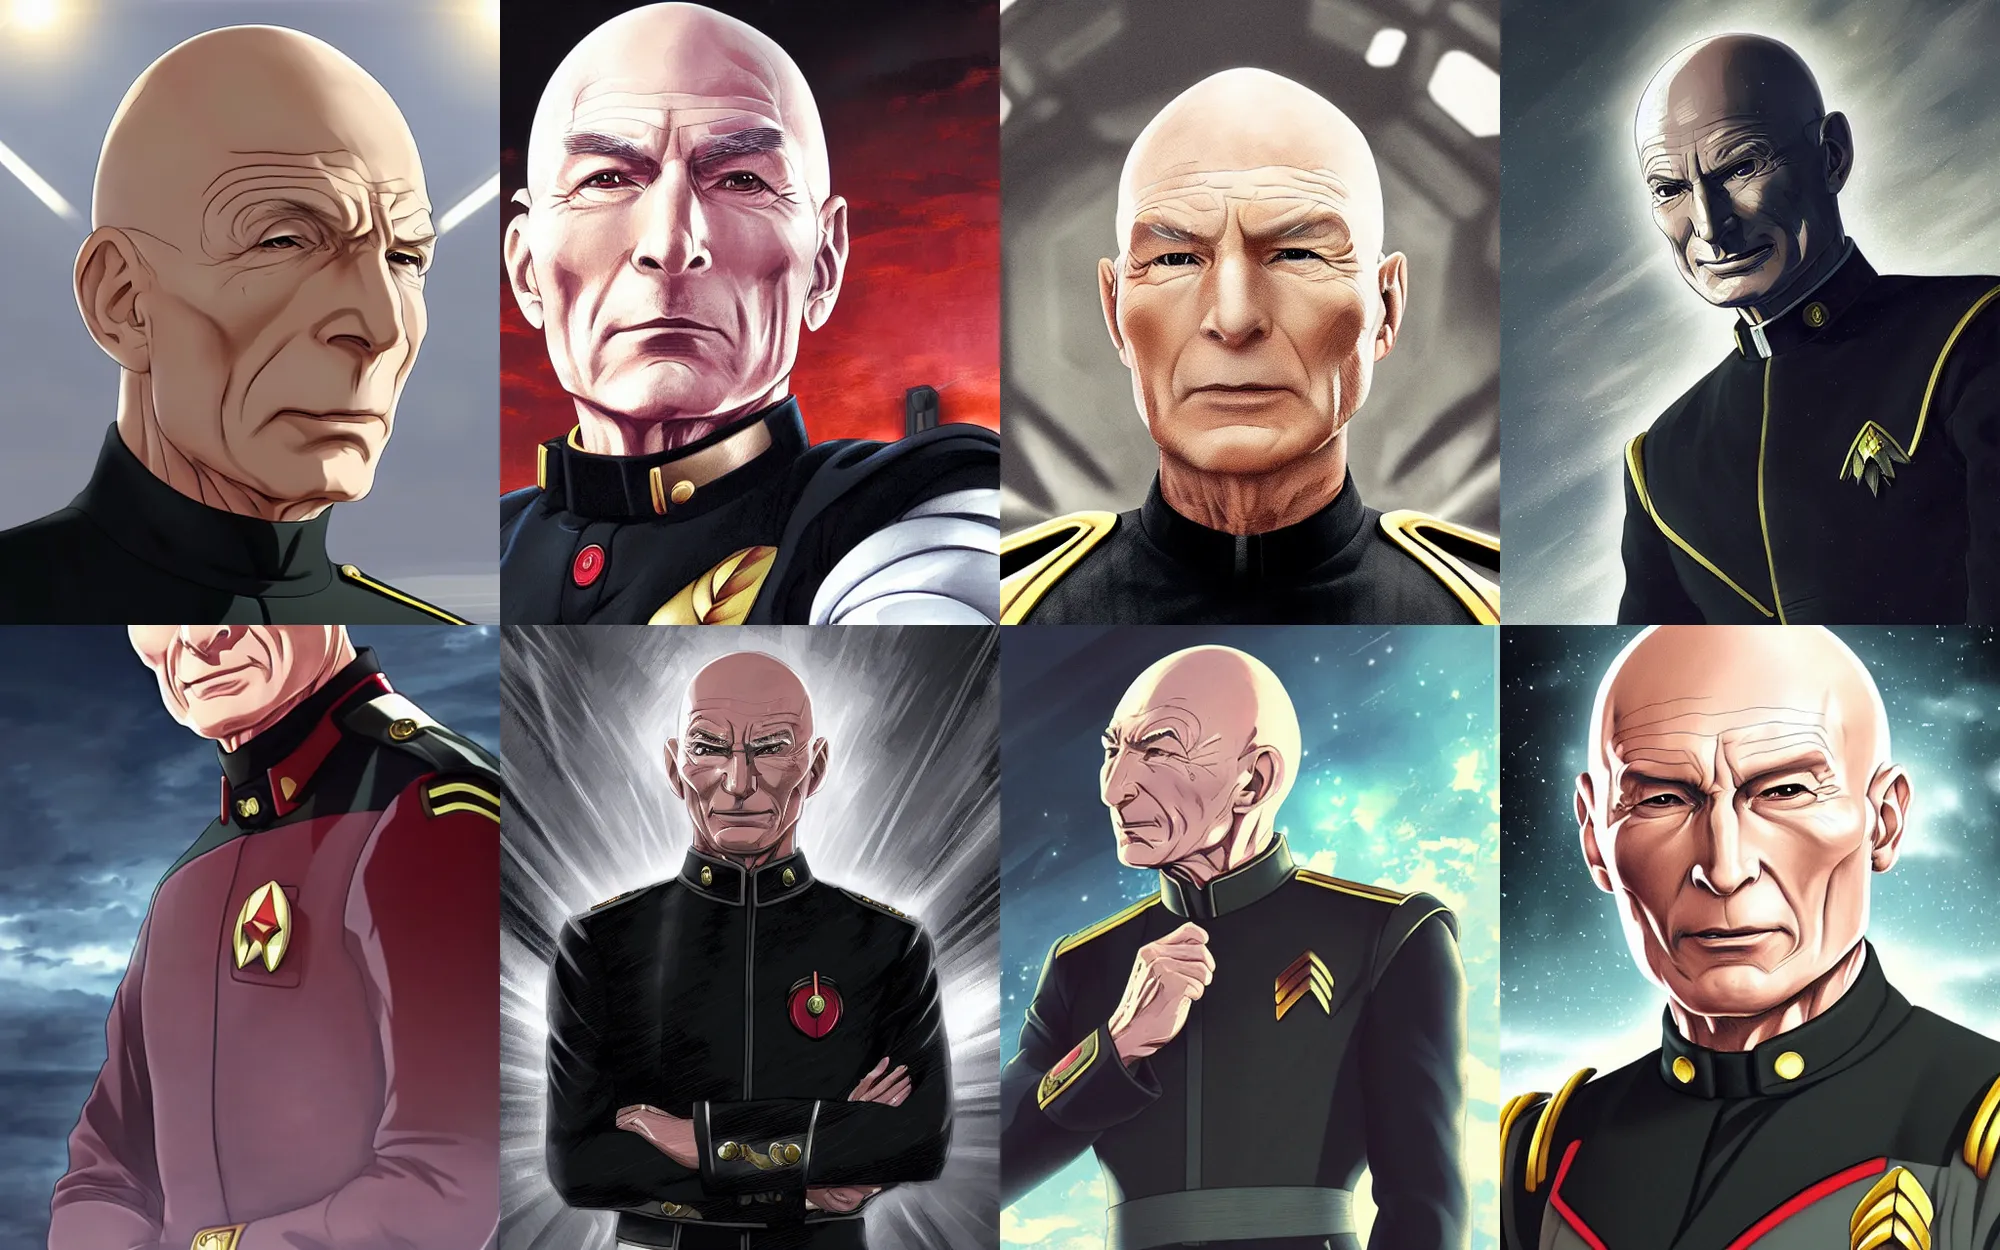 Prompt: Digital anime art by WLOP and Mobius, Closeup of Captain Picard wearing a black uniform from The Next Generation, silver insignia, serious expression, [empty warehouse] background, highly detailed, spotlight